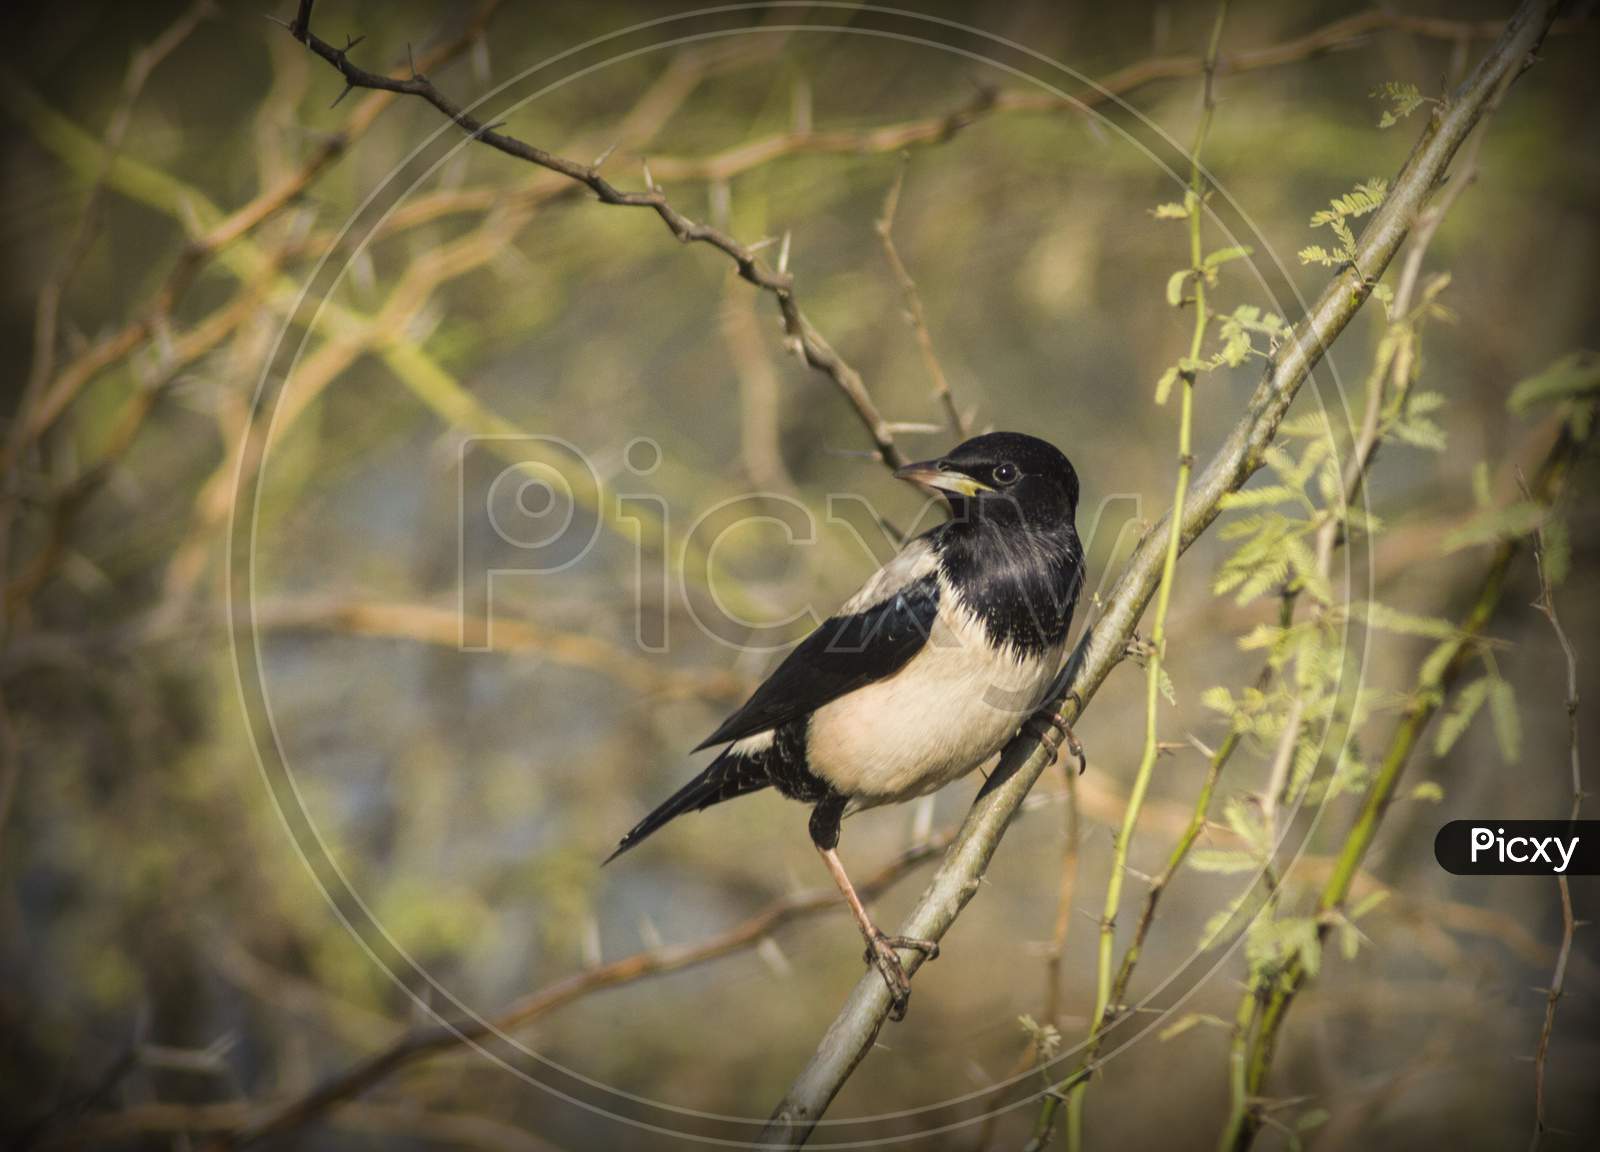 The rosy starling